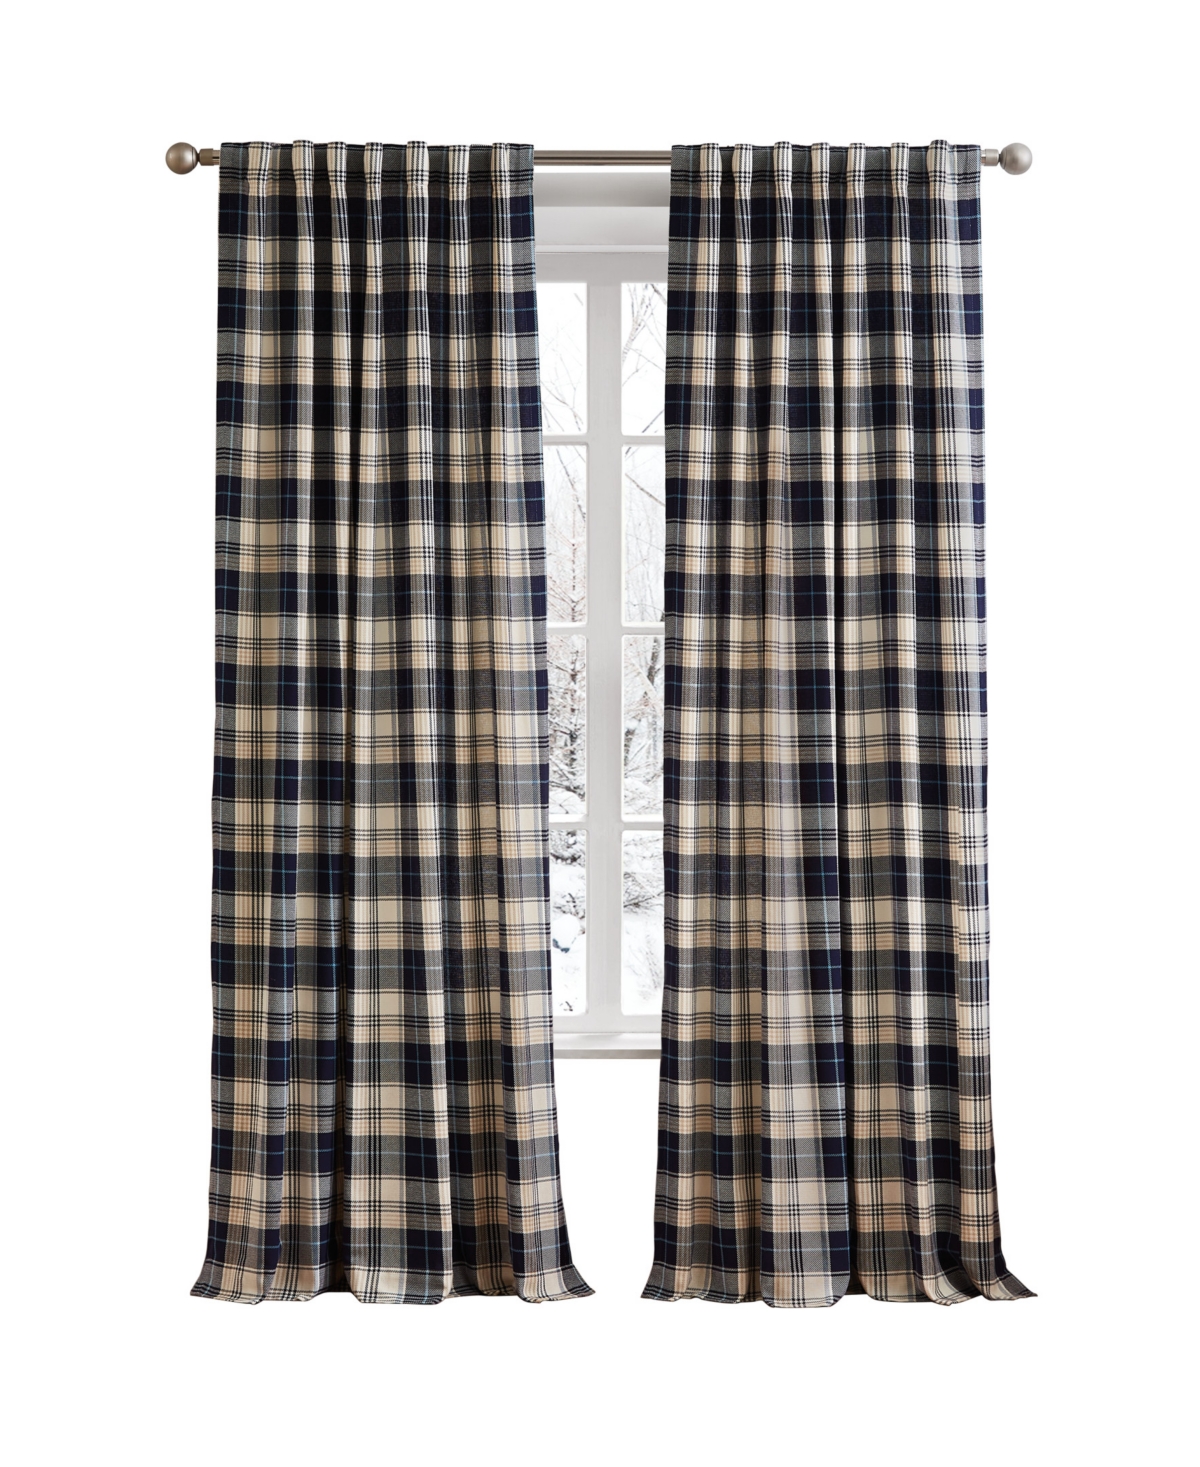 G.h. Bass & Co. Lakeview Plaid 84" Back Tab Set, 2 Panels In Navy